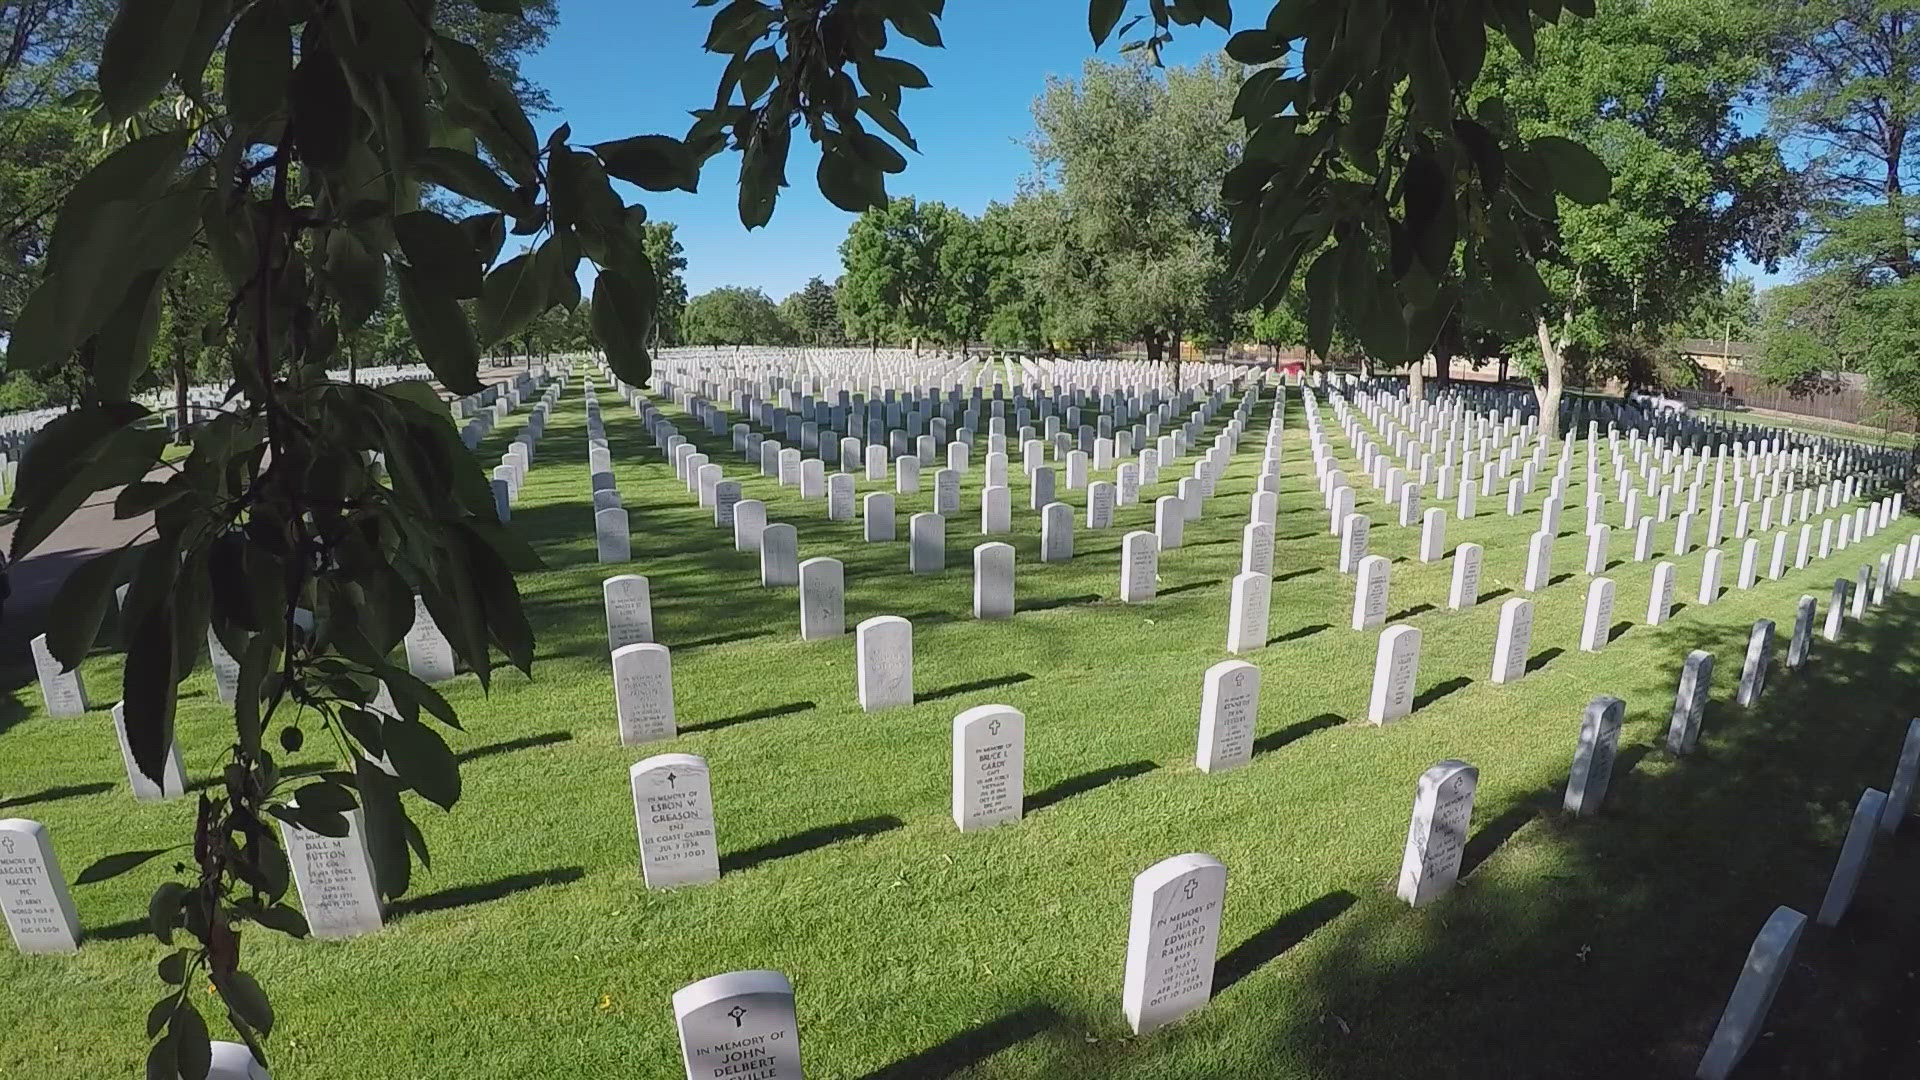 When the unclaimed, cremated remains of 27 veterans were found at mortuaries around the state, they were identified and interred at Fort Logan National Cemetery.